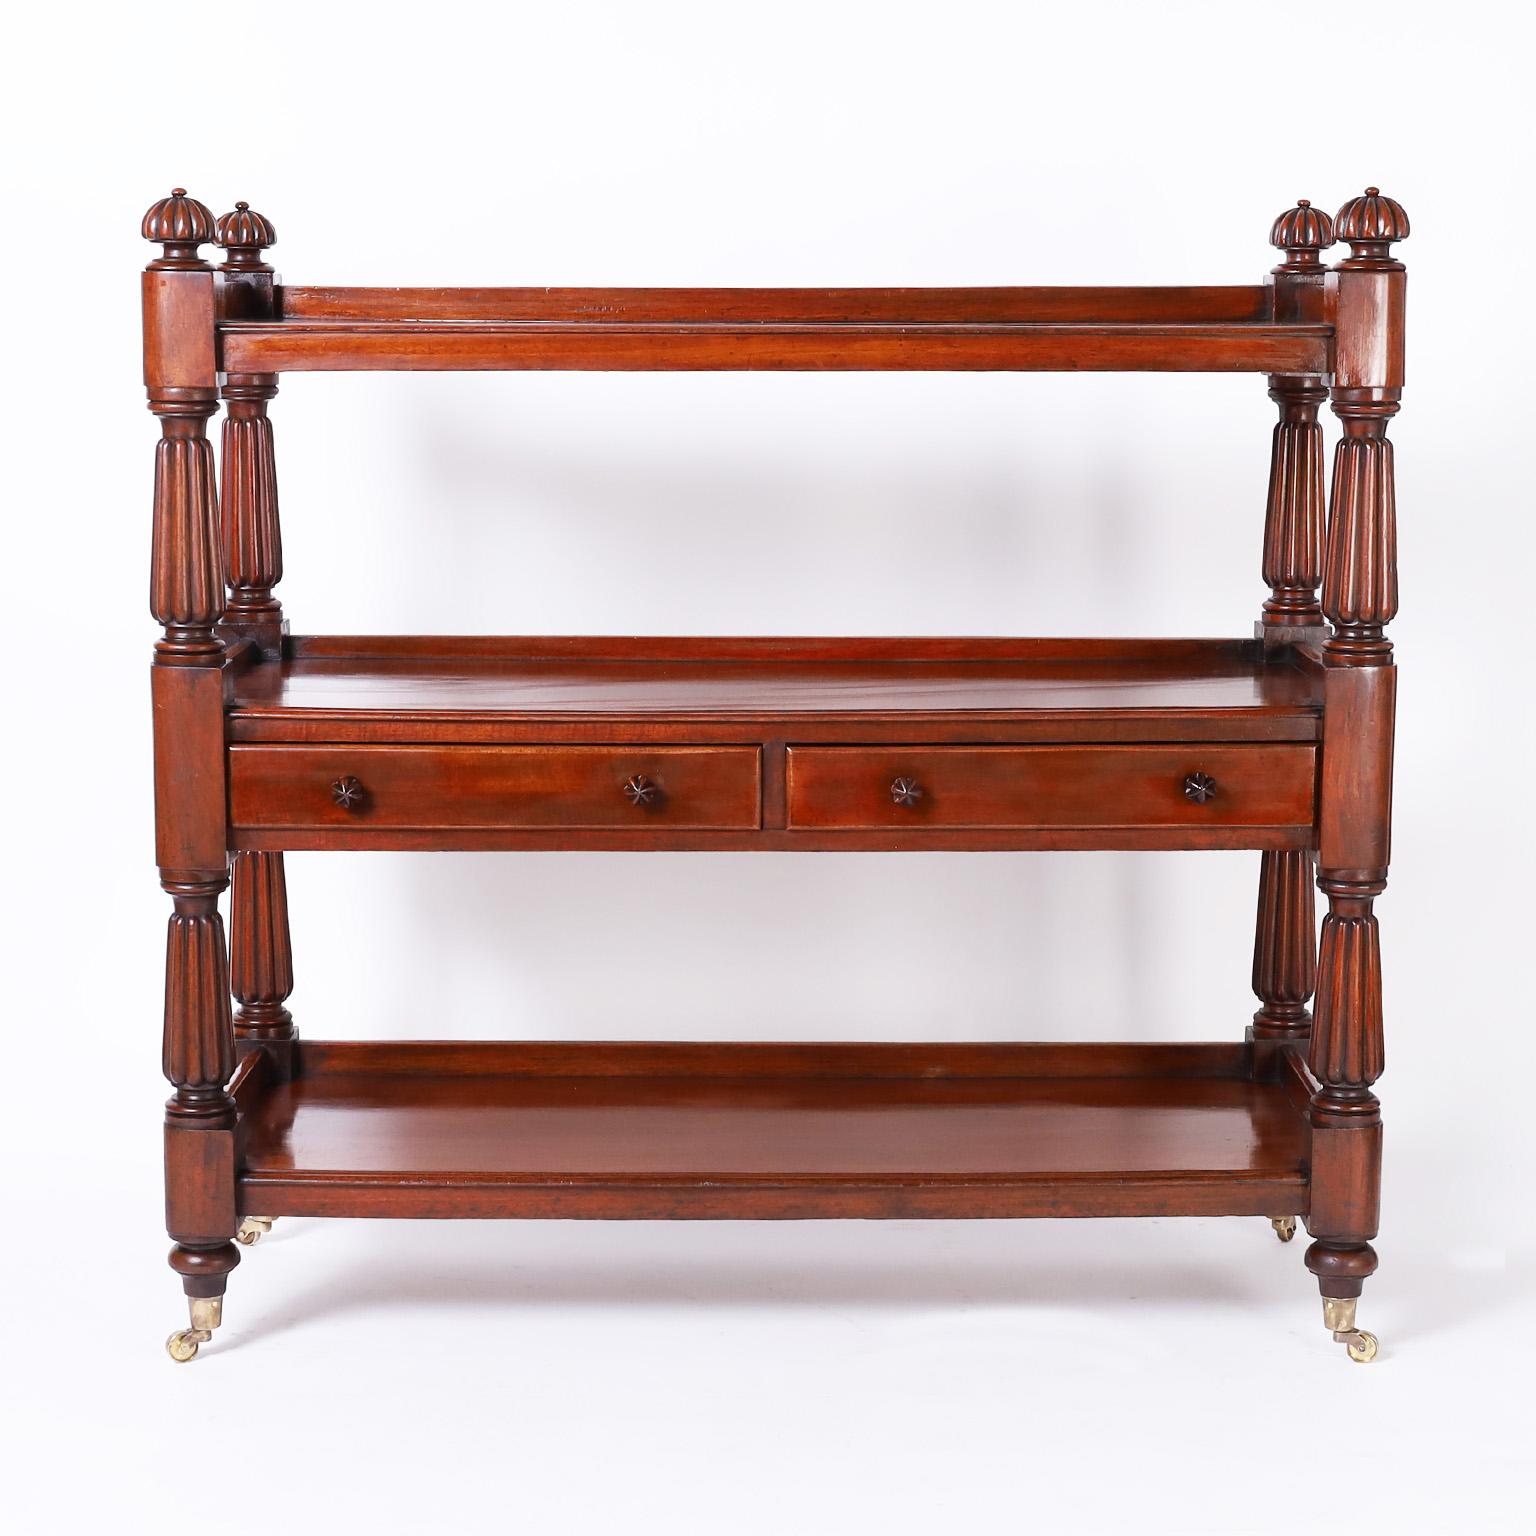 19th century English three tiered server or etagere crafted in well grained mahogany with two drawers in the center, four turned and beaded support columns with matching beaded finials and brass casters.